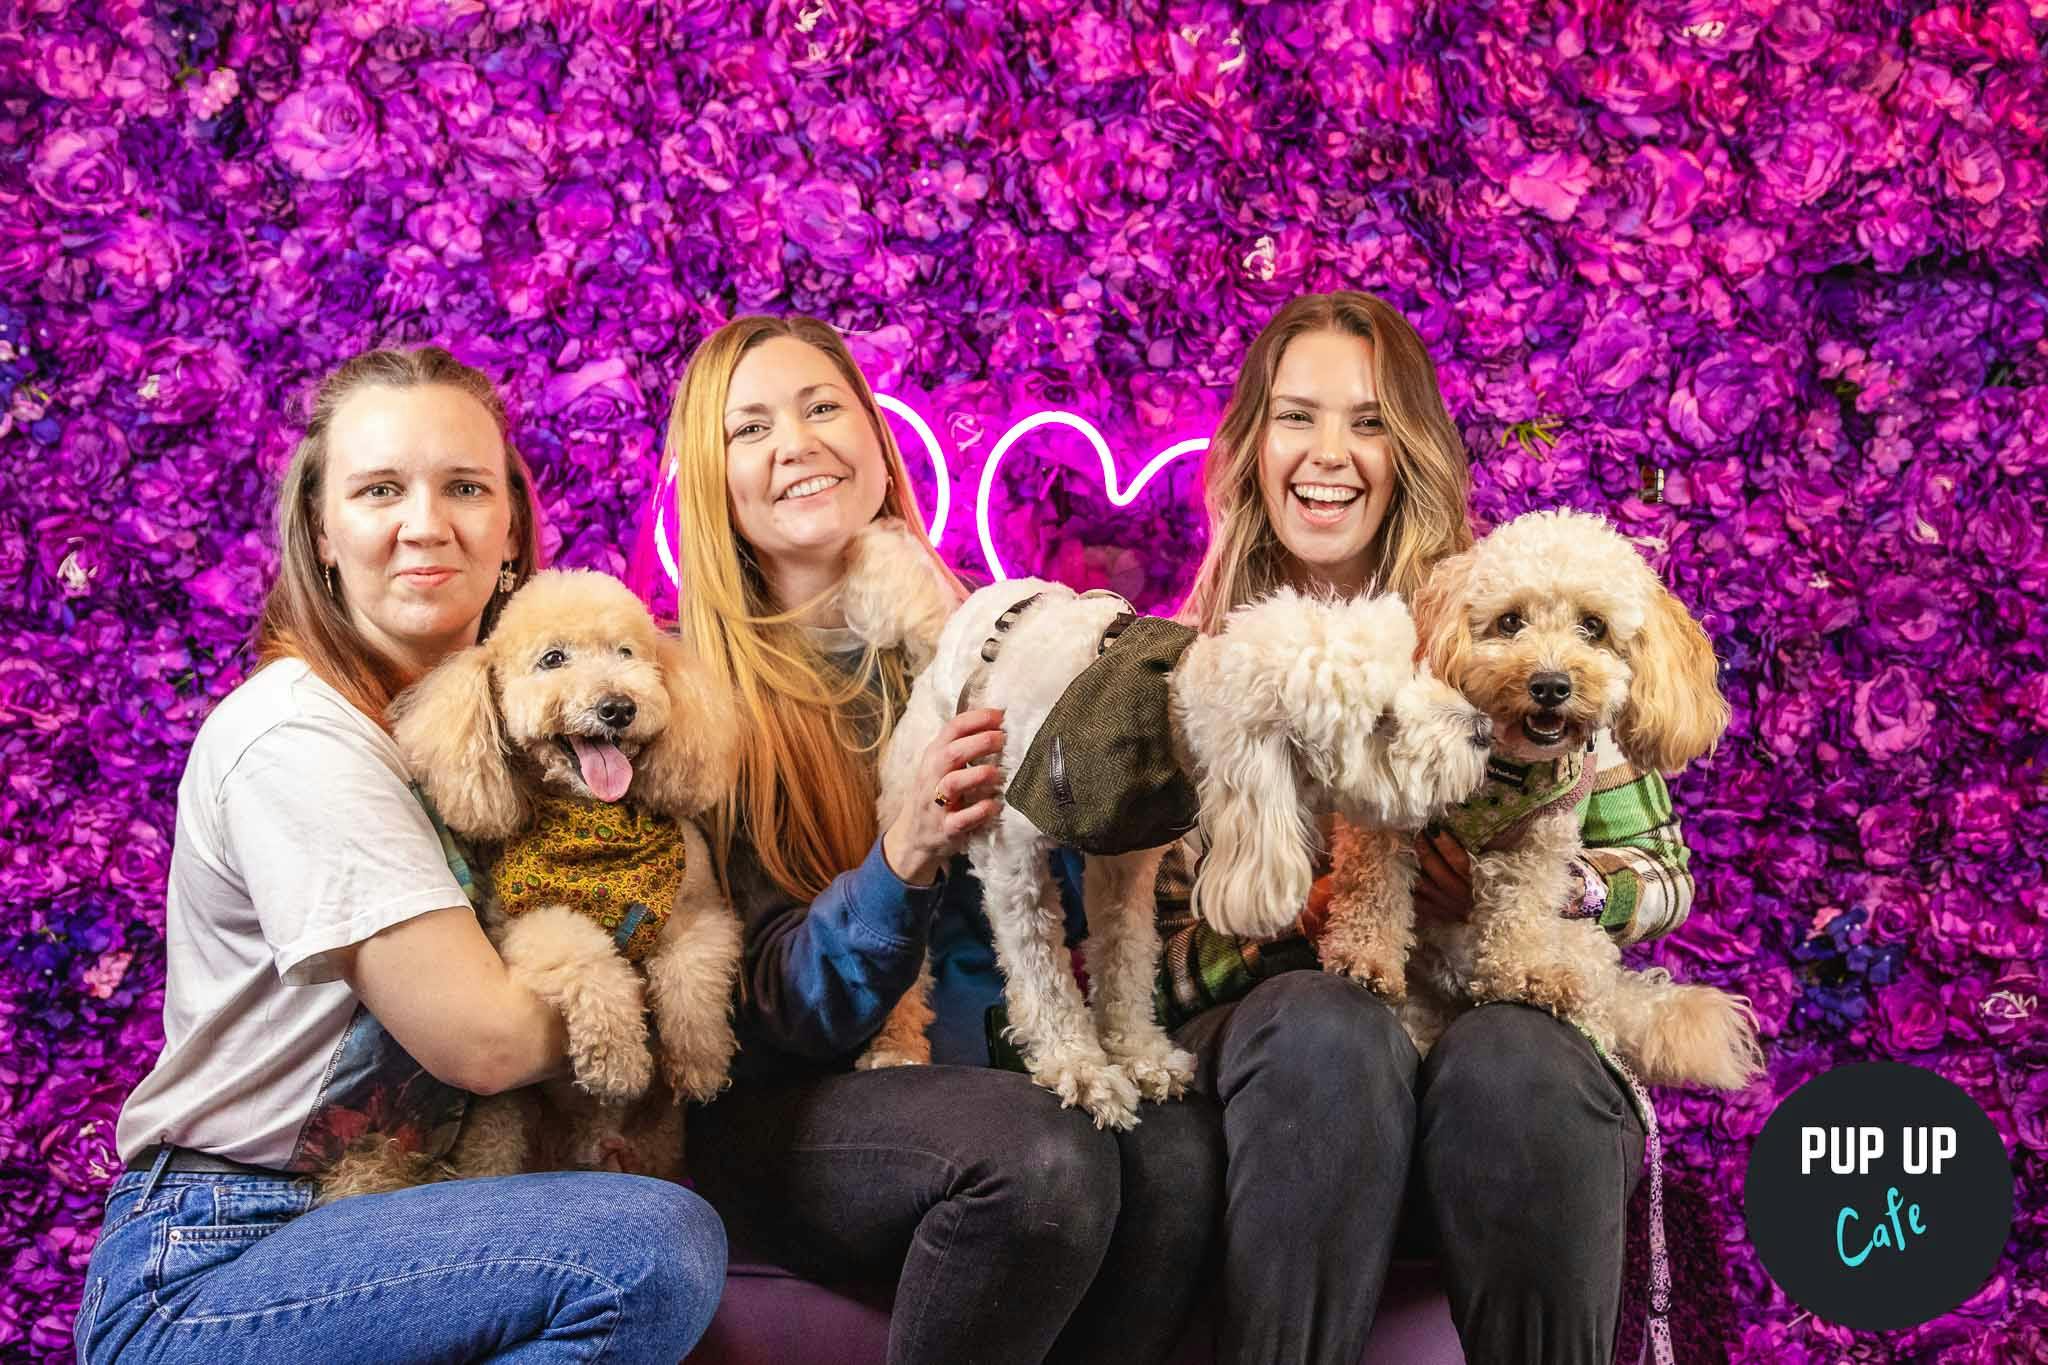 Pop-up dog cafe coming to Edinburgh with sessions for dachshunds, pugs and frenchies & doodles!